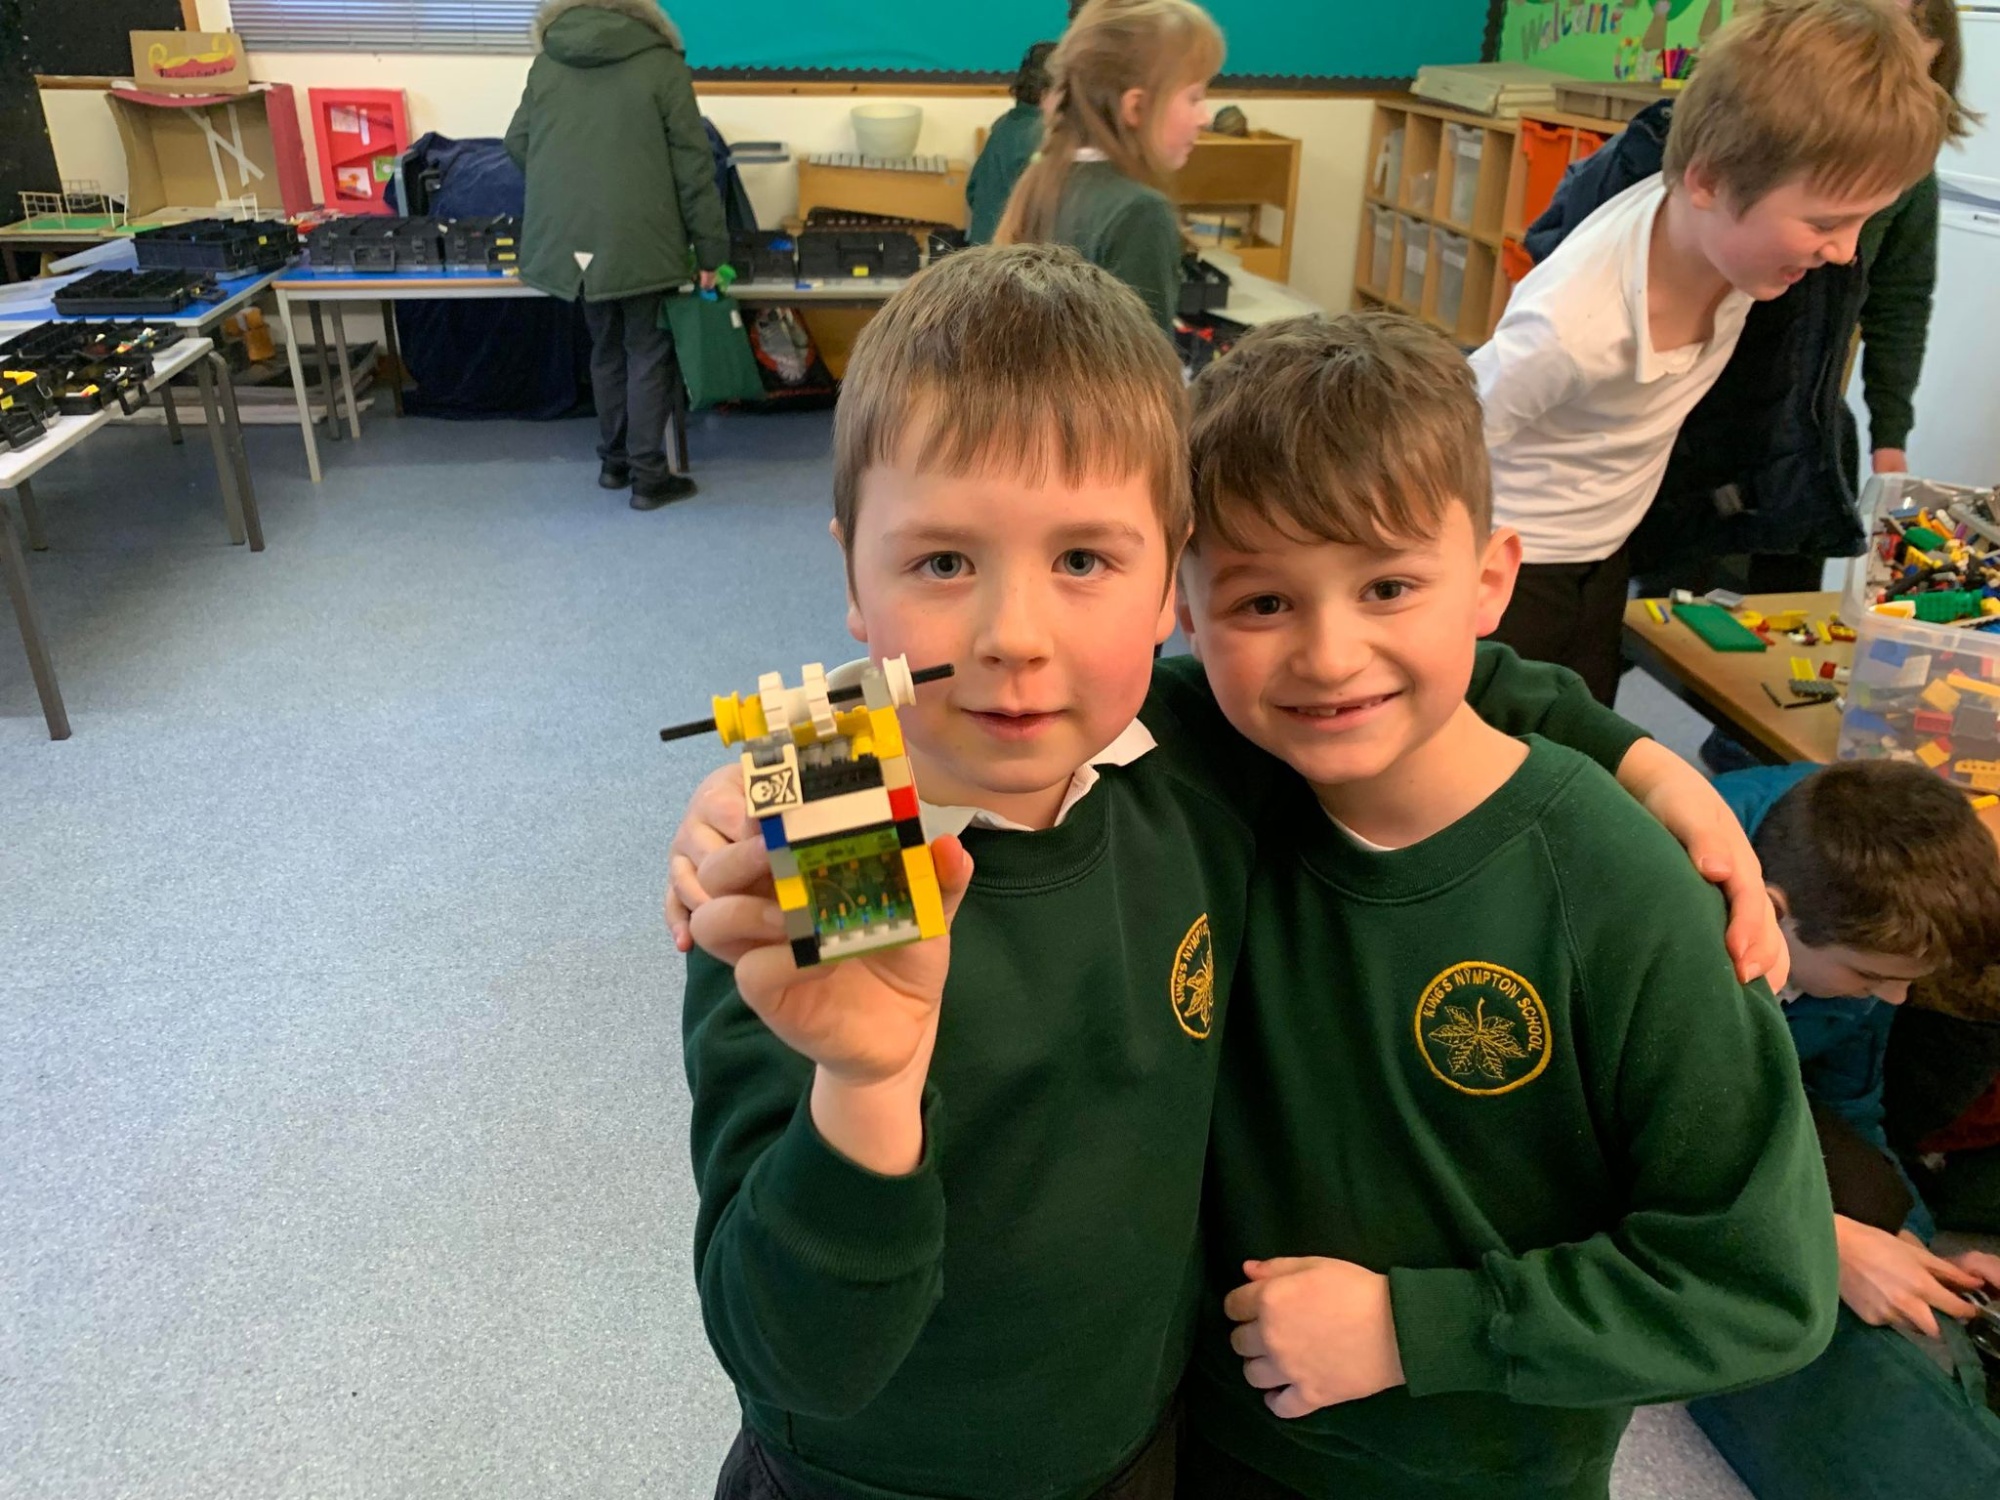 Two children, one holding up a Lego creation